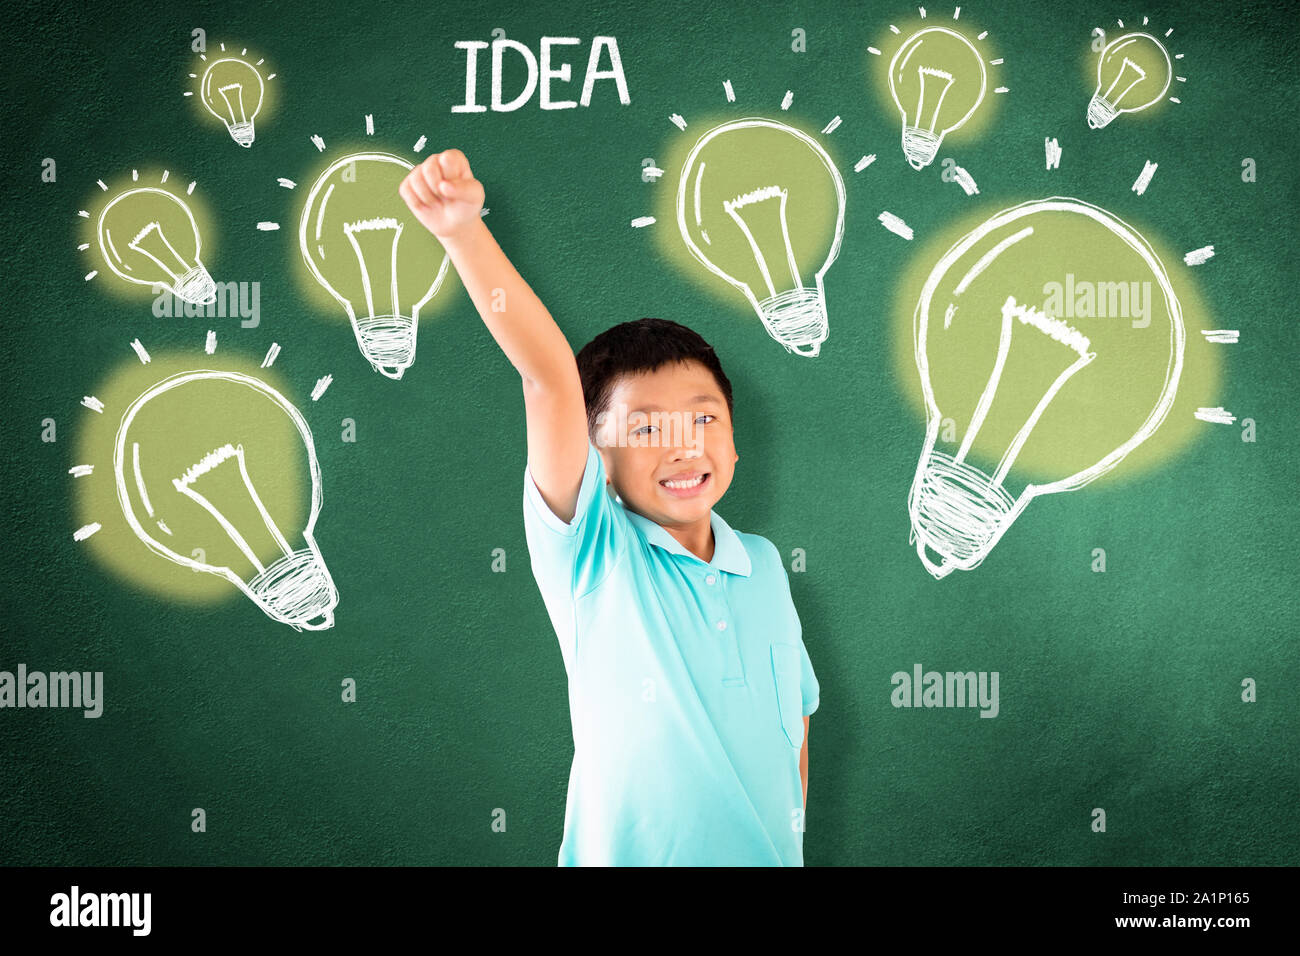 kid standing against chalkboard with idea bulb concept Stock Photo